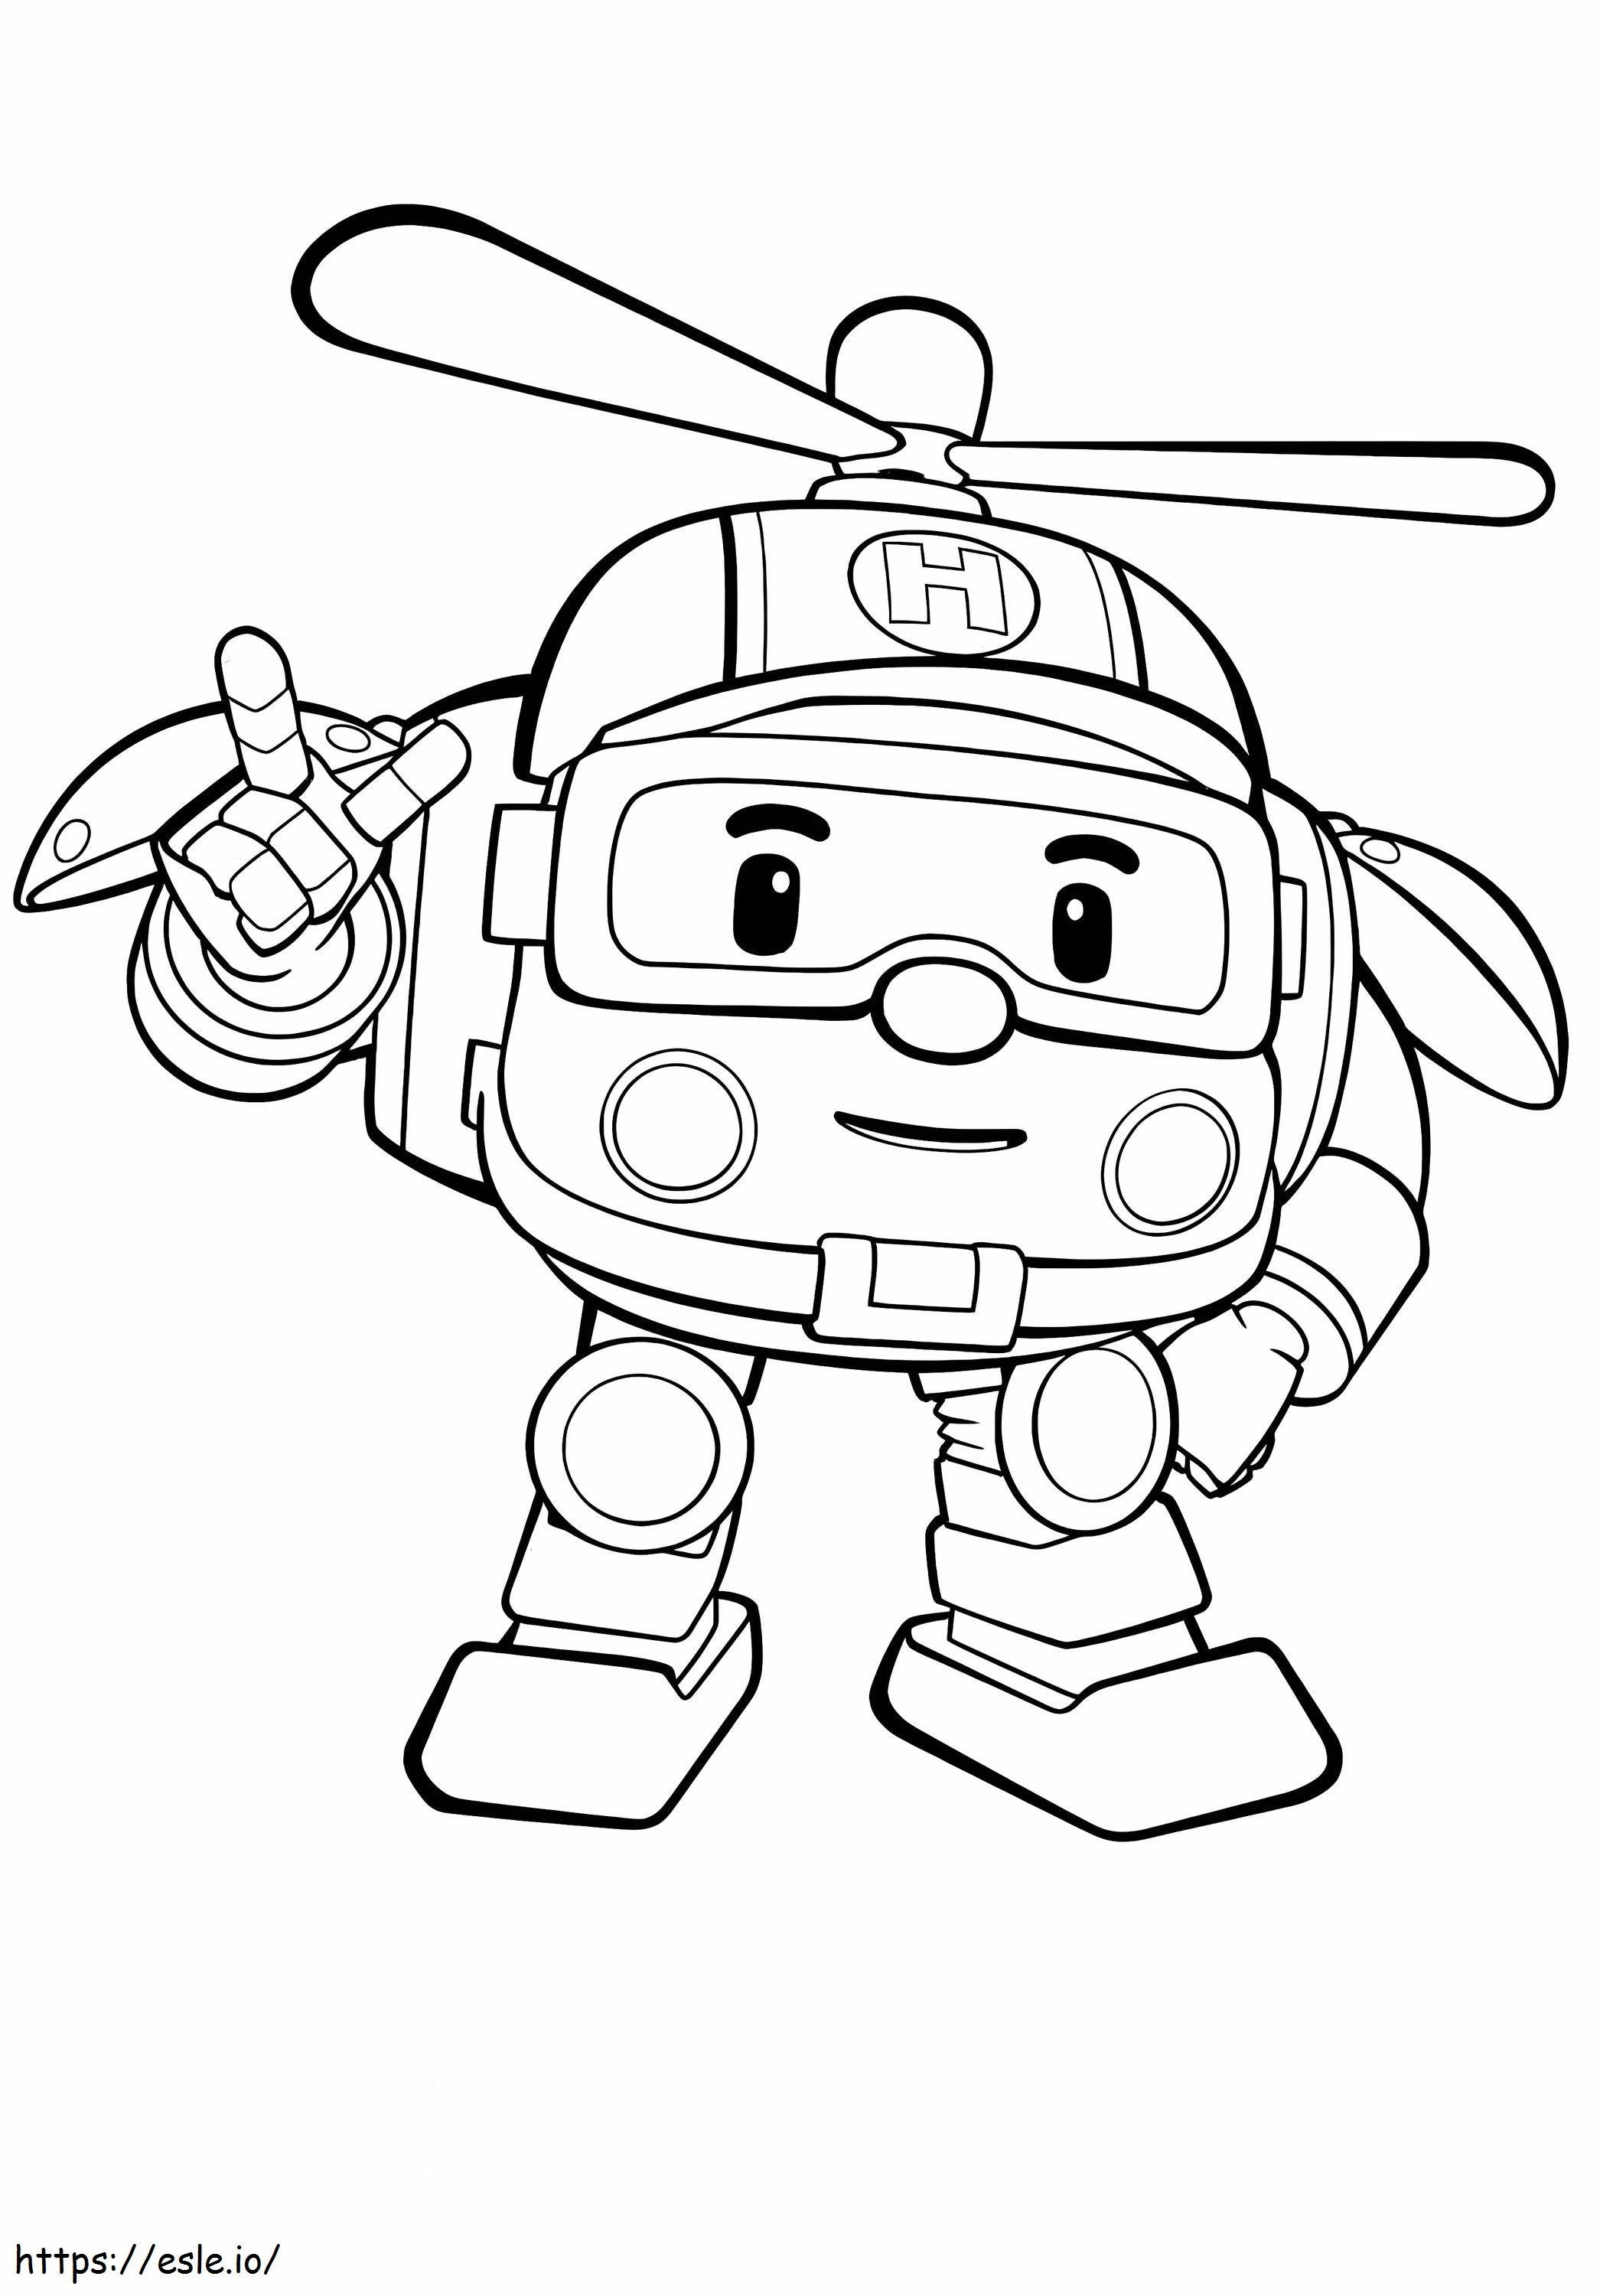 Helly From Robocar Poli coloring page